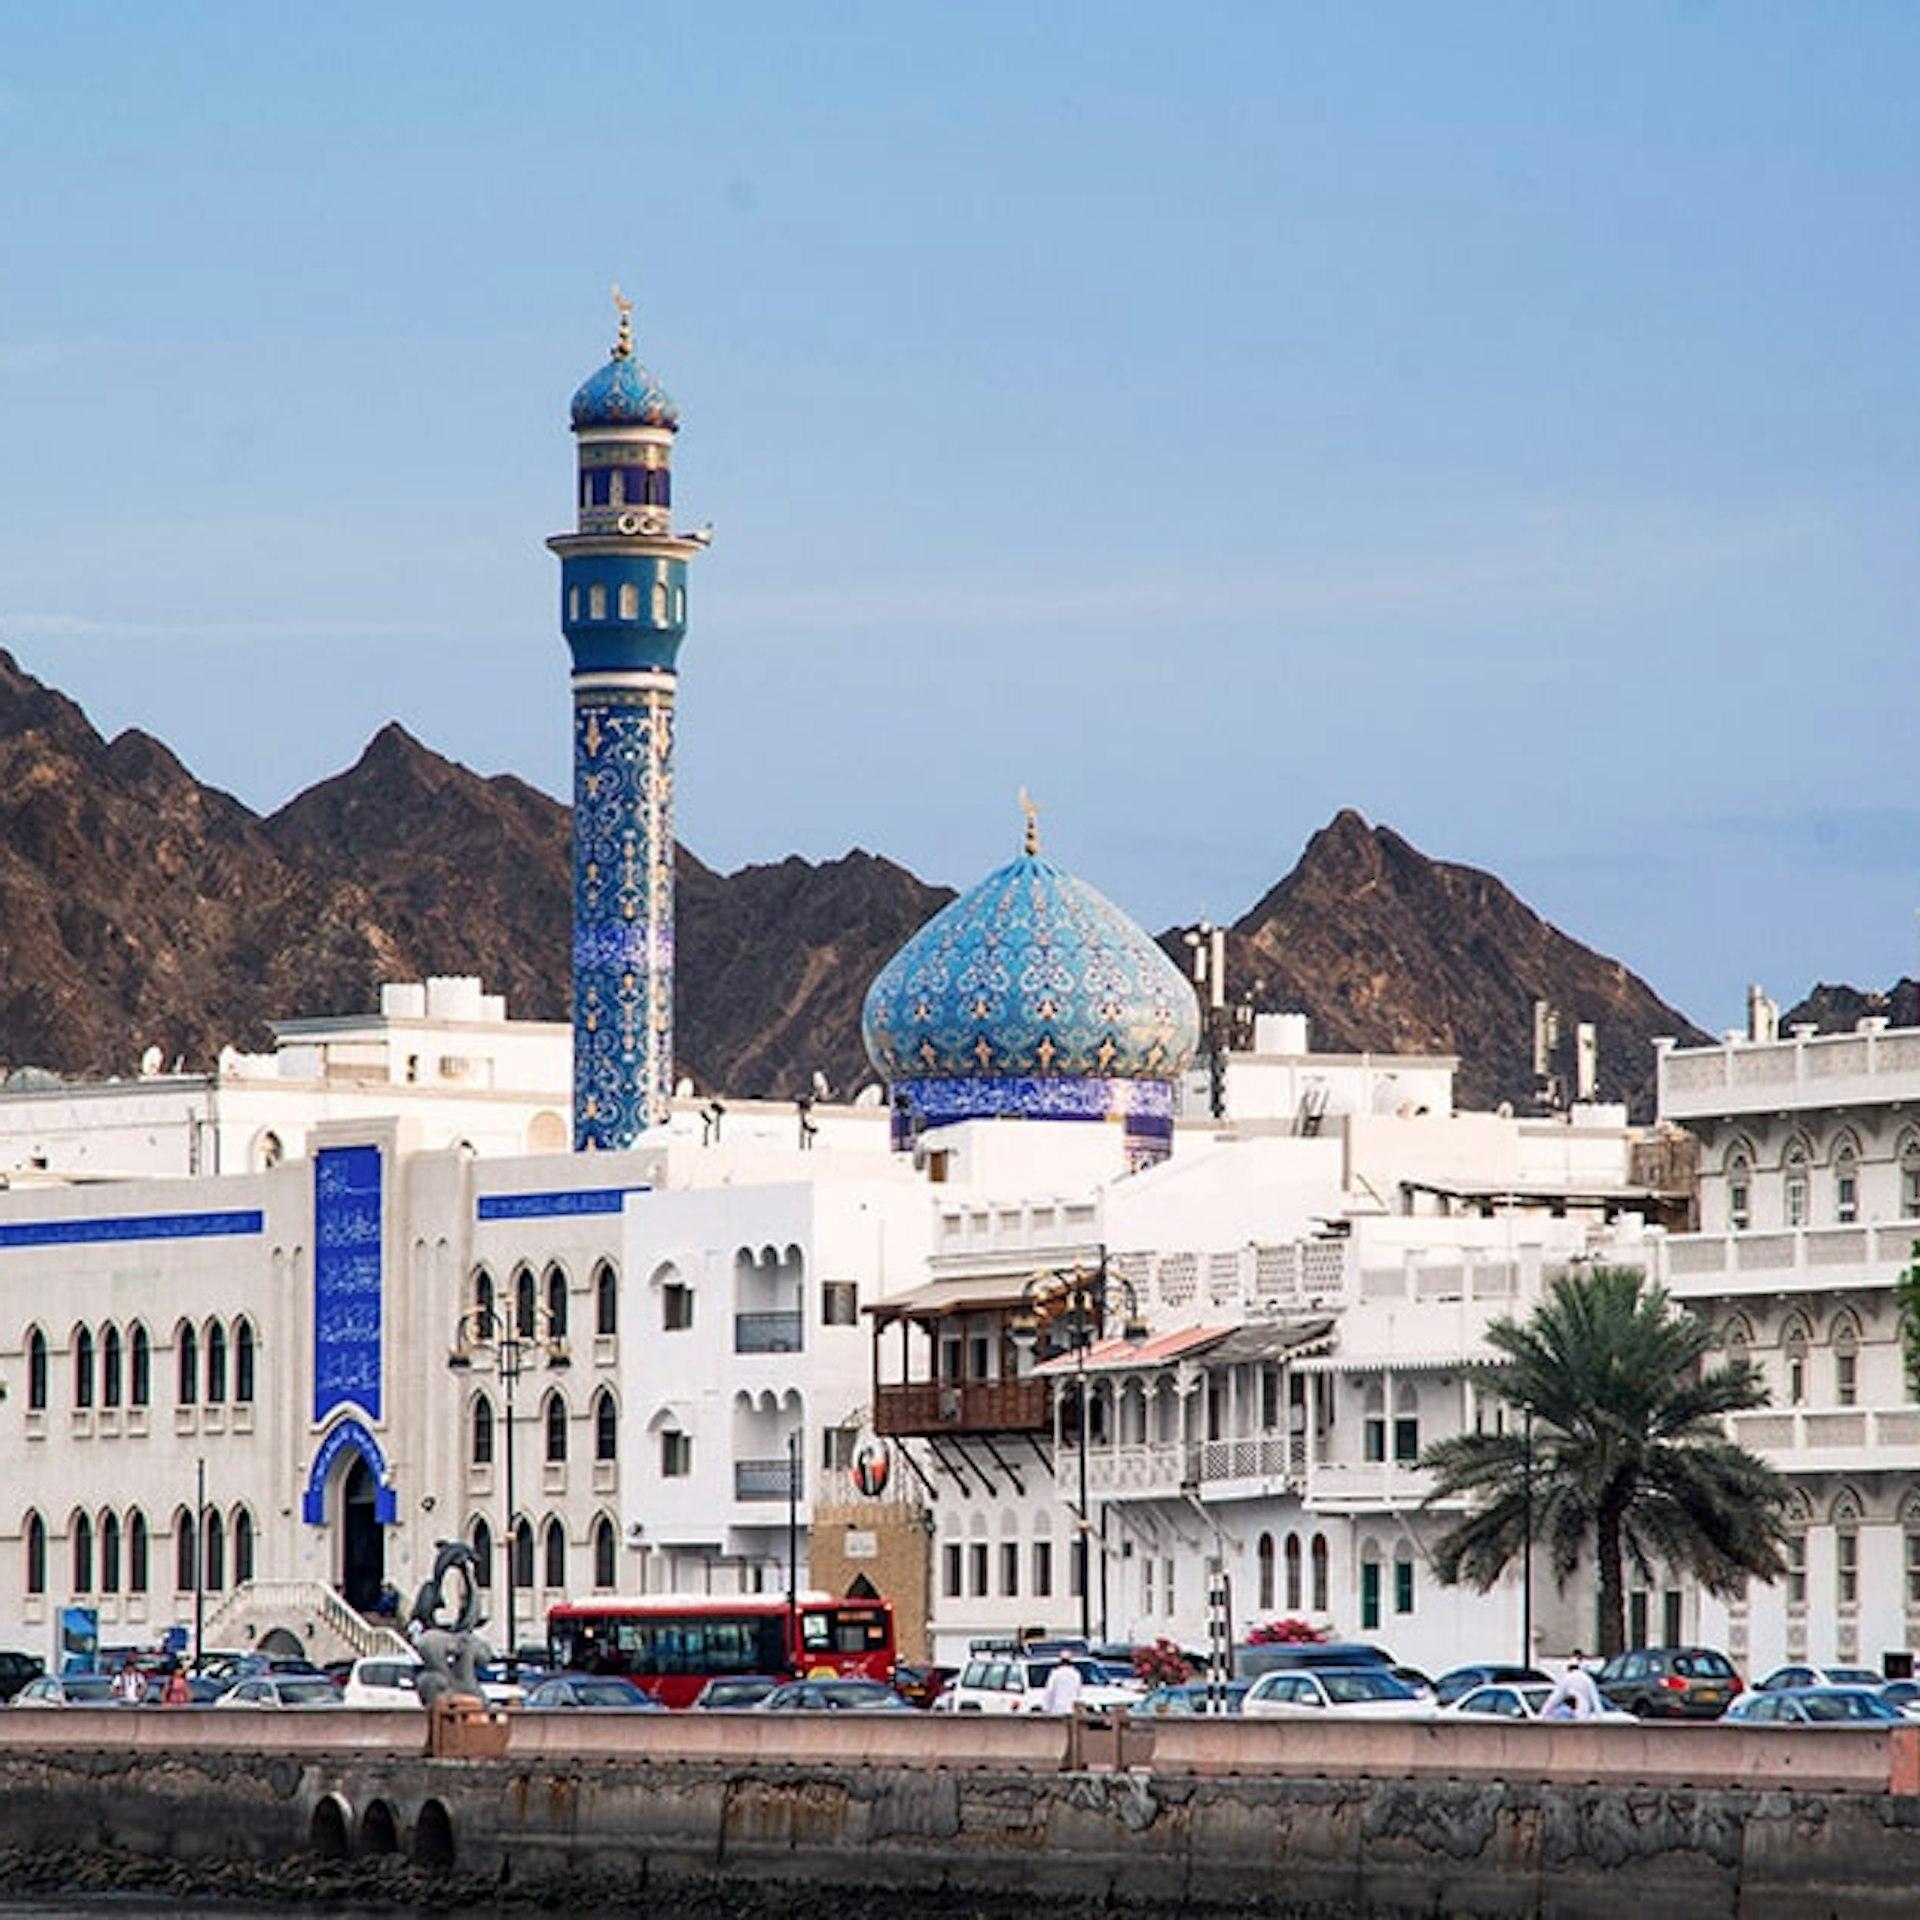 Get the latest news and updates on e-invoicing, e-ordering, e-archiving and indirect tax regulatory requirements for Oman.